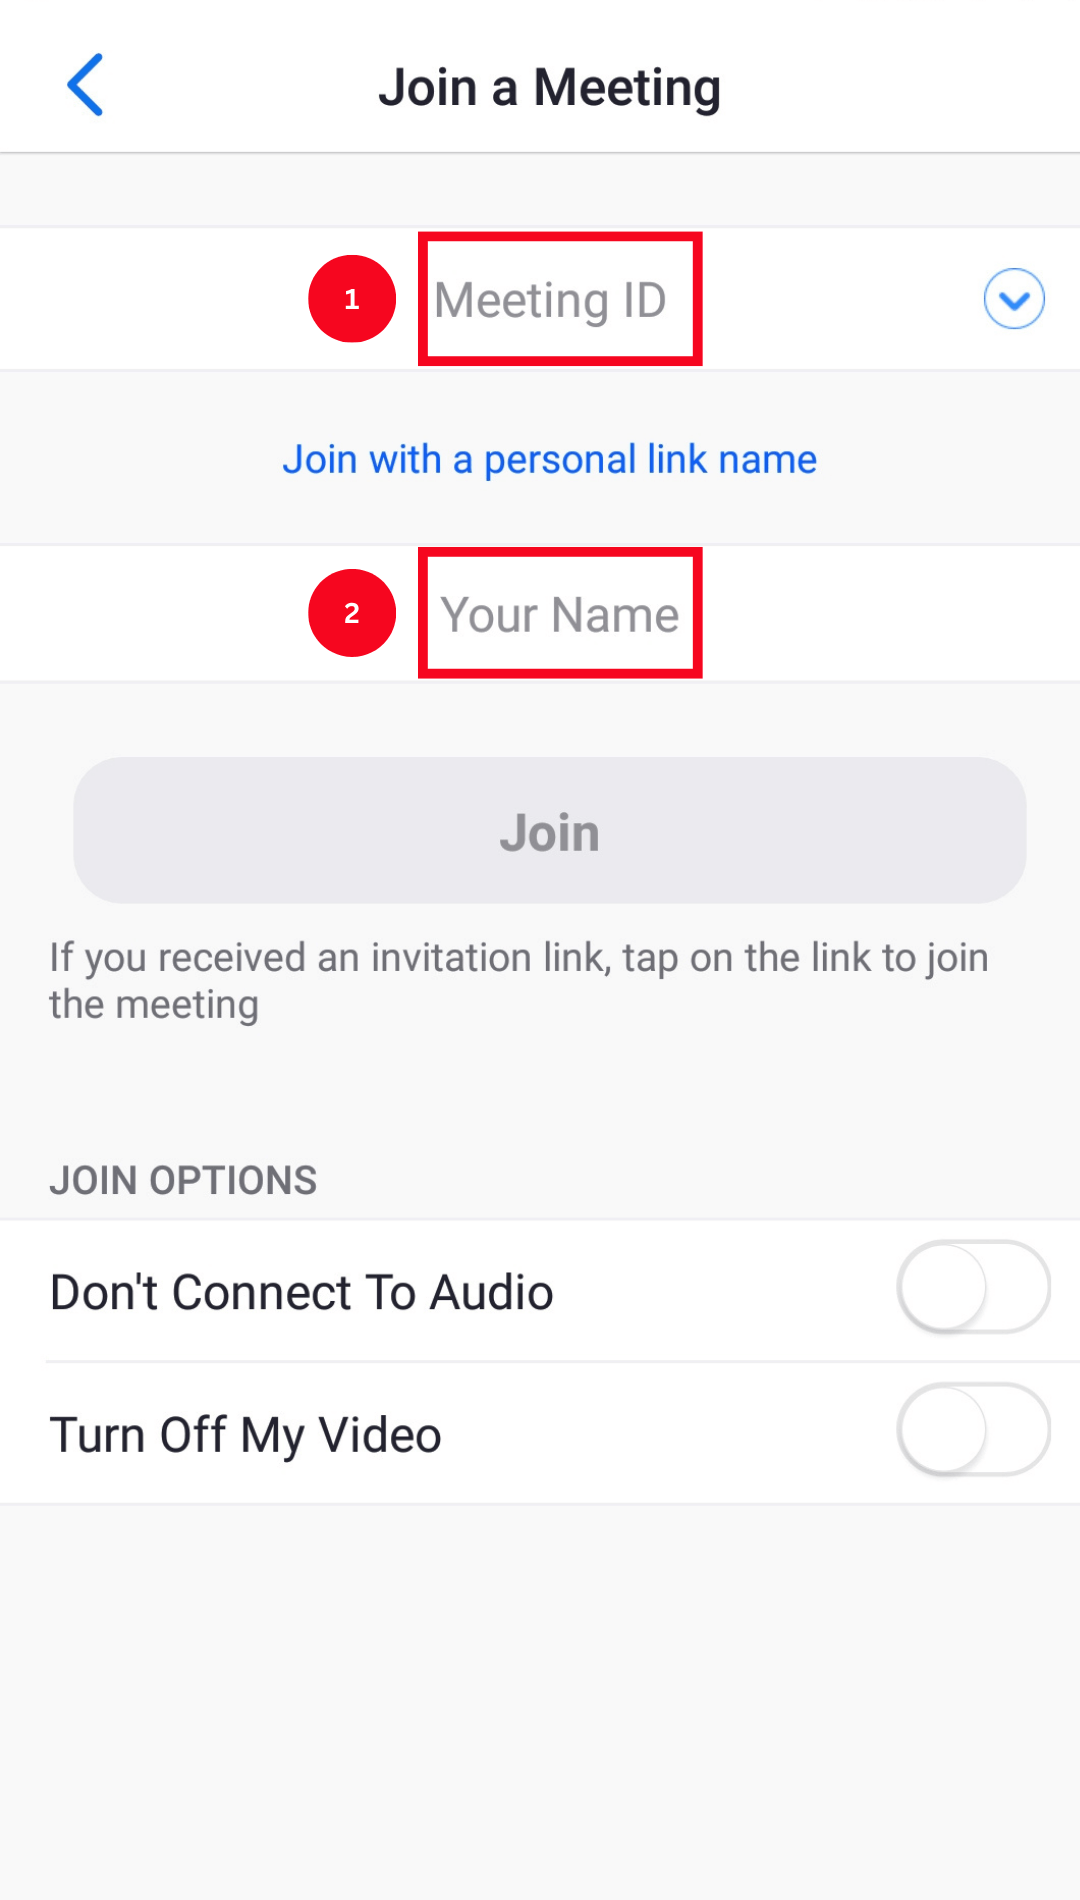 enter the meeting id and display name